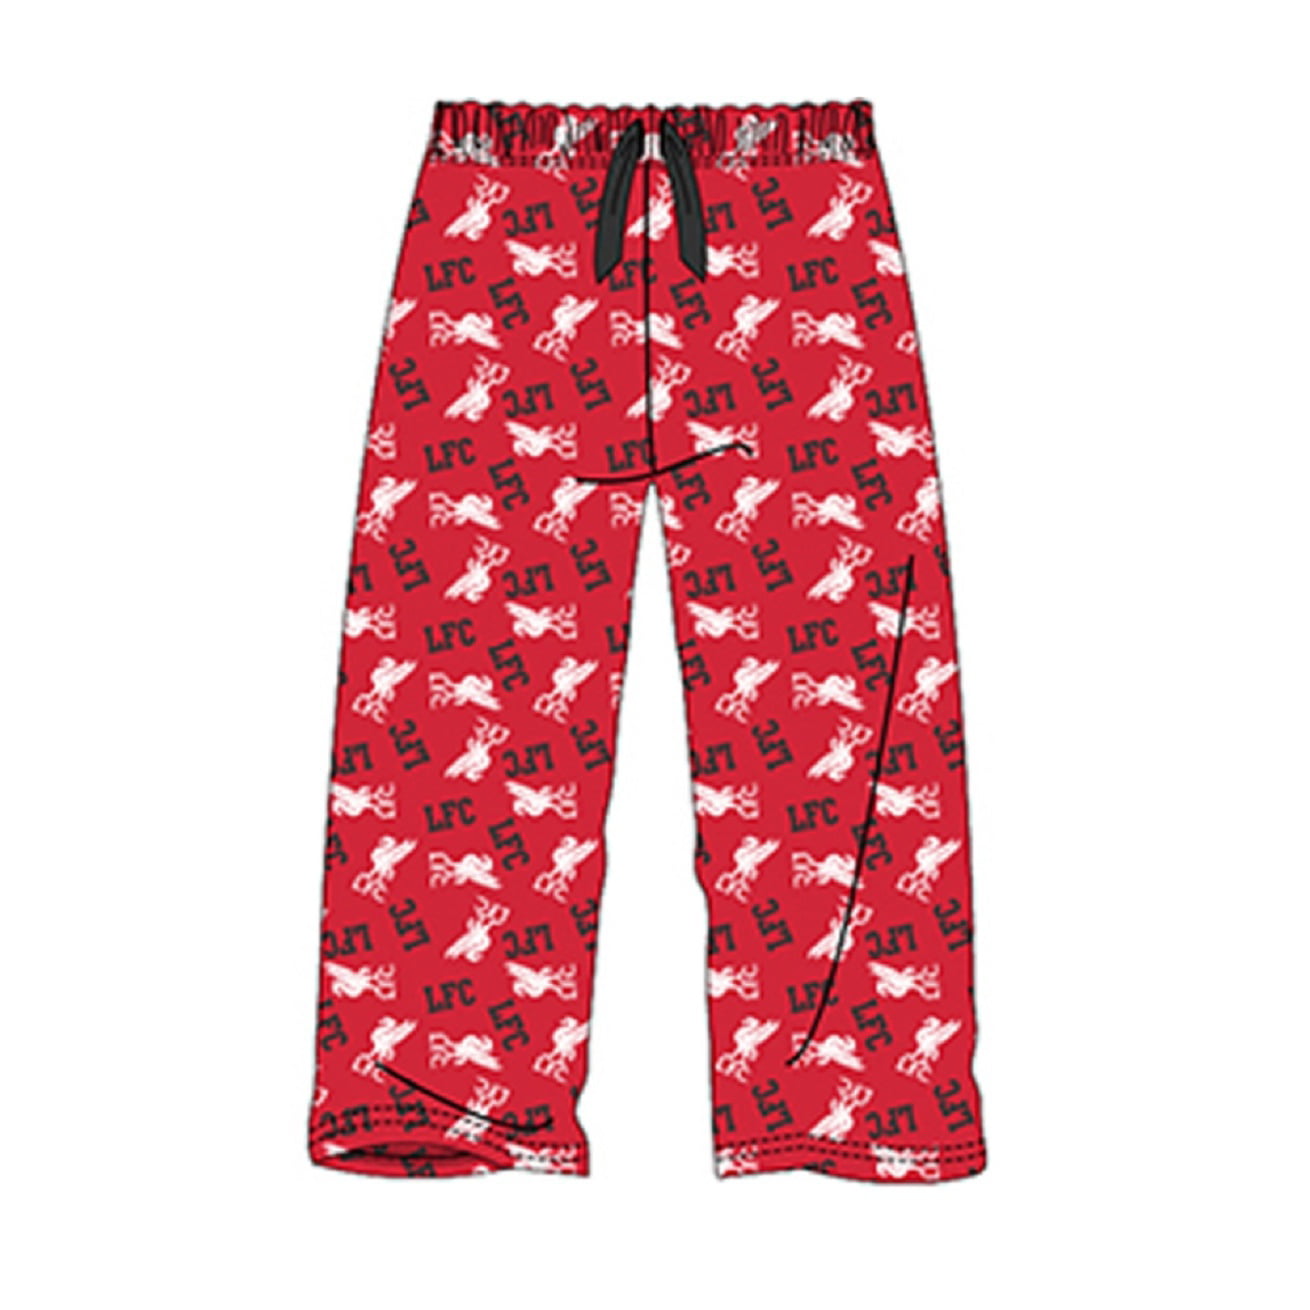 Official Adults Liverpool Lounge Pants 100% Cotton - Sizes S to XL